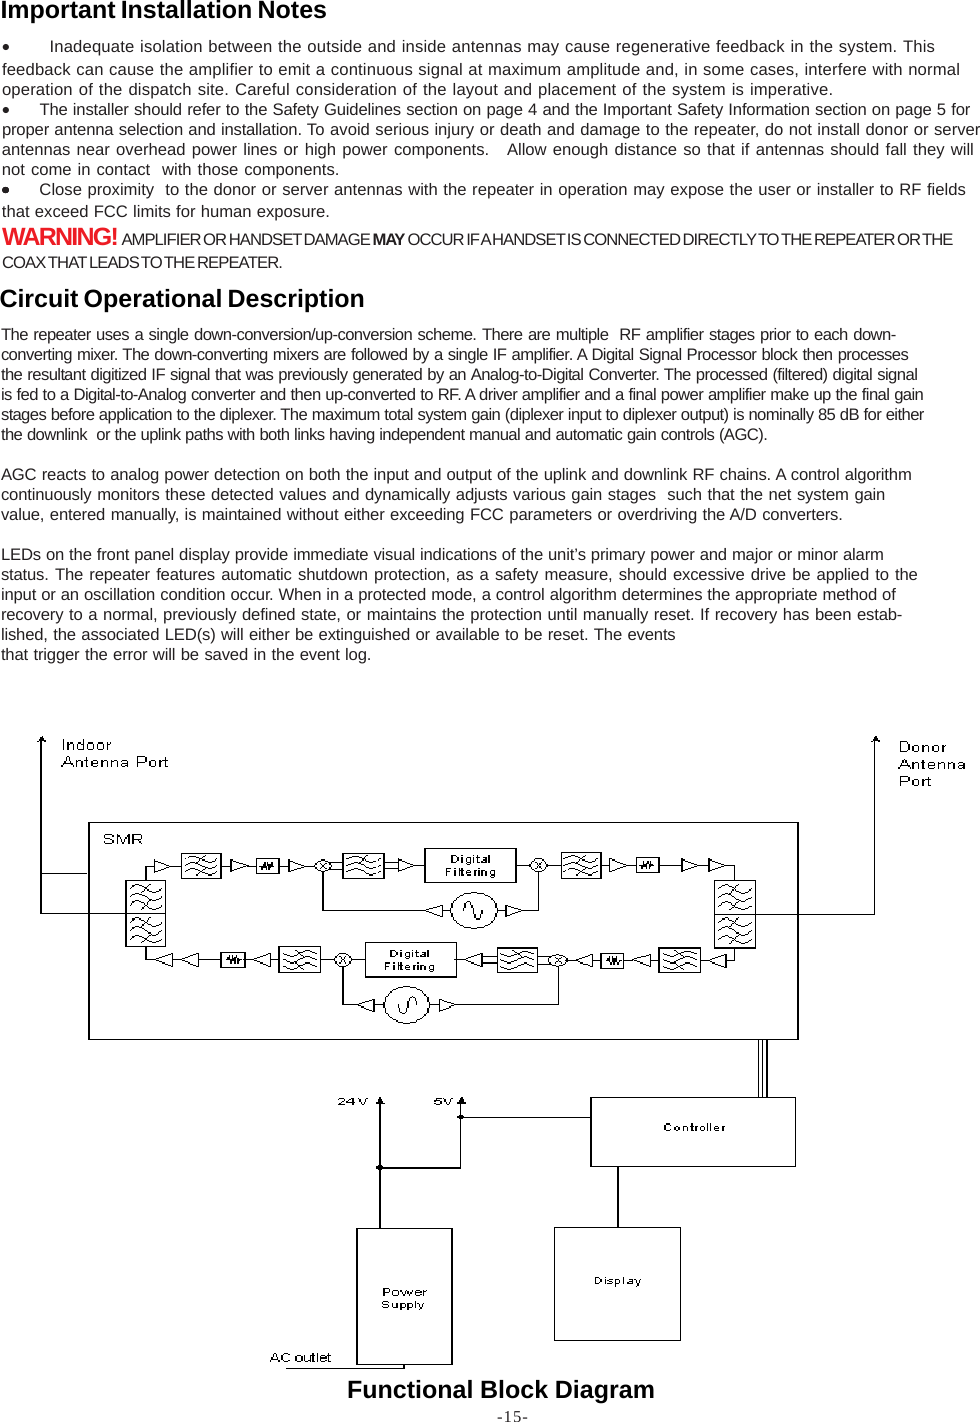 -15-Functional Block Diagram•       Inadequate isolation between the outside and inside antennas may cause regenerative feedback in the system. Thisfeedback can cause the amplifier to emit a continuous signal at maximum amplitude and, in some cases, interfere with normaloperation of the dispatch site. Careful consideration of the layout and placement of the system is imperative.•The installer should refer to the Safety Guidelines section on page 4 and the Important Safety Information section on page 5 forproper antenna selection and installation. To avoid serious injury or death and damage to the repeater, do not install donor or serverantennas near overhead power lines or high power components.   Allow enough distance so that if antennas should fall they willnot come in contact  with those components.•••••Close proximity  to the donor or server antennas with the repeater in operation may expose the user or installer to RF fieldsthat exceed FCC limits for human exposure.WARNING!  AMPLIFIER OR HANDSET DAMAGE MAY OCCUR IF A HANDSET IS CONNECTED DIRECTLY TO THE REPEATER OR THECOAX THAT LEADS TO THE REPEATER.Important Installation NotesThe repeater uses a single down-conversion/up-conversion scheme. There are multiple  RF amplifier stages prior to each down-converting mixer. The down-converting mixers are followed by a single IF amplifier. A Digital Signal Processor block then processesthe resultant digitized IF signal that was previously generated by an Analog-to-Digital Converter. The processed (filtered) digital signalis fed to a Digital-to-Analog converter and then up-converted to RF. A driver amplifier and a final power amplifier make up the final gainstages before application to the diplexer. The maximum total system gain (diplexer input to diplexer output) is nominally 85 dB for eitherthe downlink  or the uplink paths with both links having independent manual and automatic gain controls (AGC).AGC reacts to analog power detection on both the input and output of the uplink and downlink RF chains. A control algorithmcontinuously monitors these detected values and dynamically adjusts various gain stages  such that the net system gainvalue, entered manually, is maintained without either exceeding FCC parameters or overdriving the A/D converters.LEDs on the front panel display provide immediate visual indications of the unit’s primary power and major or minor alarmstatus. The repeater features automatic shutdown protection, as a safety measure, should excessive drive be applied to theinput or an oscillation condition occur. When in a protected mode, a control algorithm determines the appropriate method ofrecovery to a normal, previously defined state, or maintains the protection until manually reset. If recovery has been estab-lished, the associated LED(s) will either be extinguished or available to be reset. The eventsthat trigger the error will be saved in the event log.Circuit Operational Description